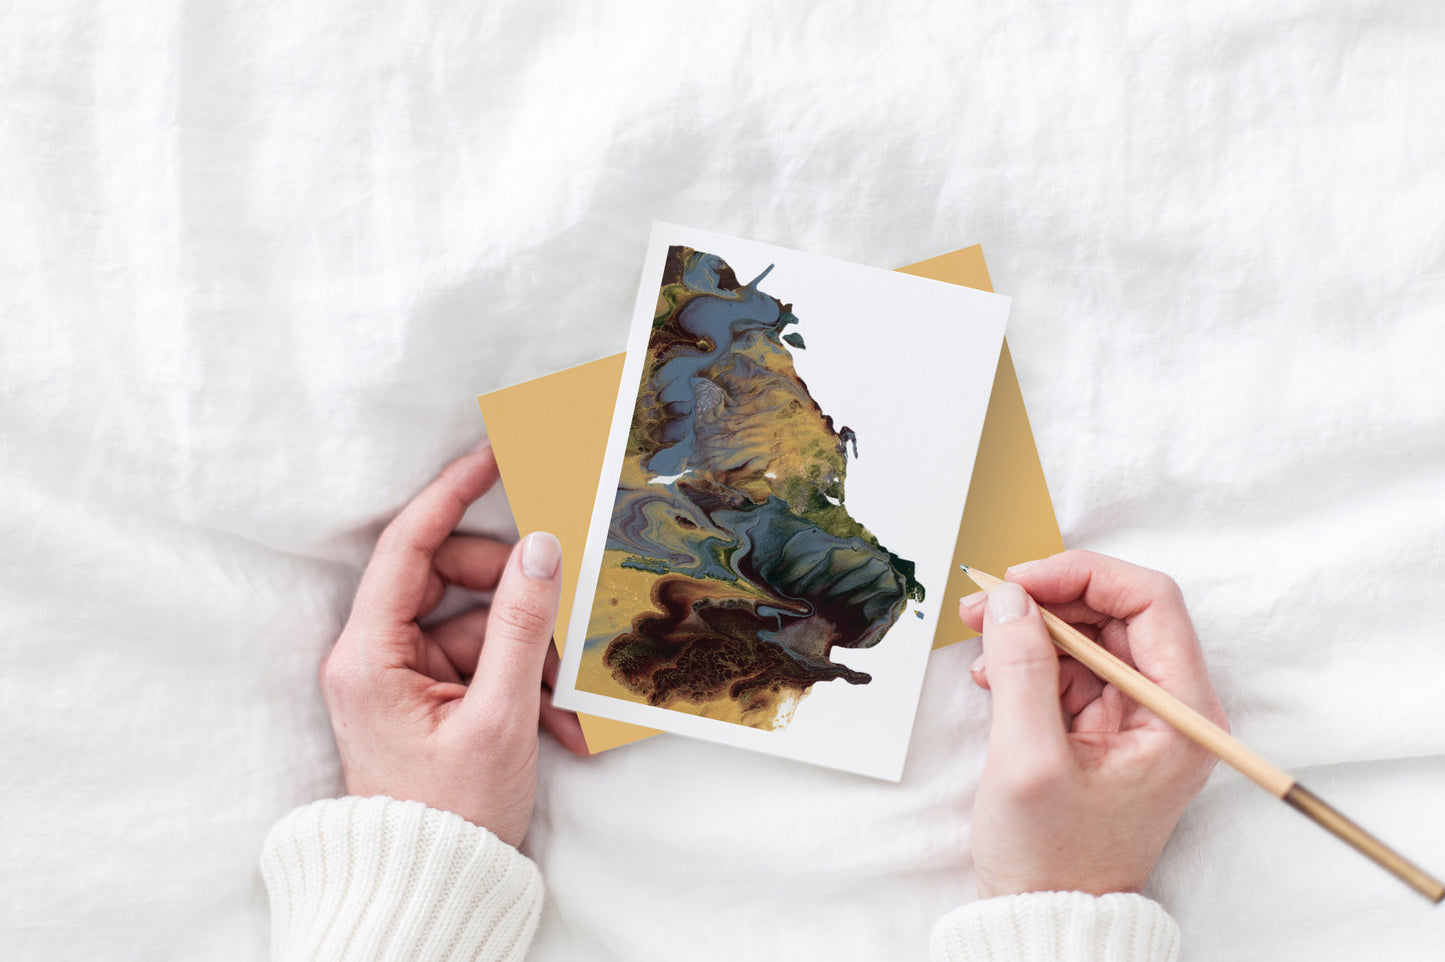 The abstract painting greeting card sits with a gold envelope on white bedding with a women's hands on either side of it. She's holding a pencil and you can see her white sweater sleeves.